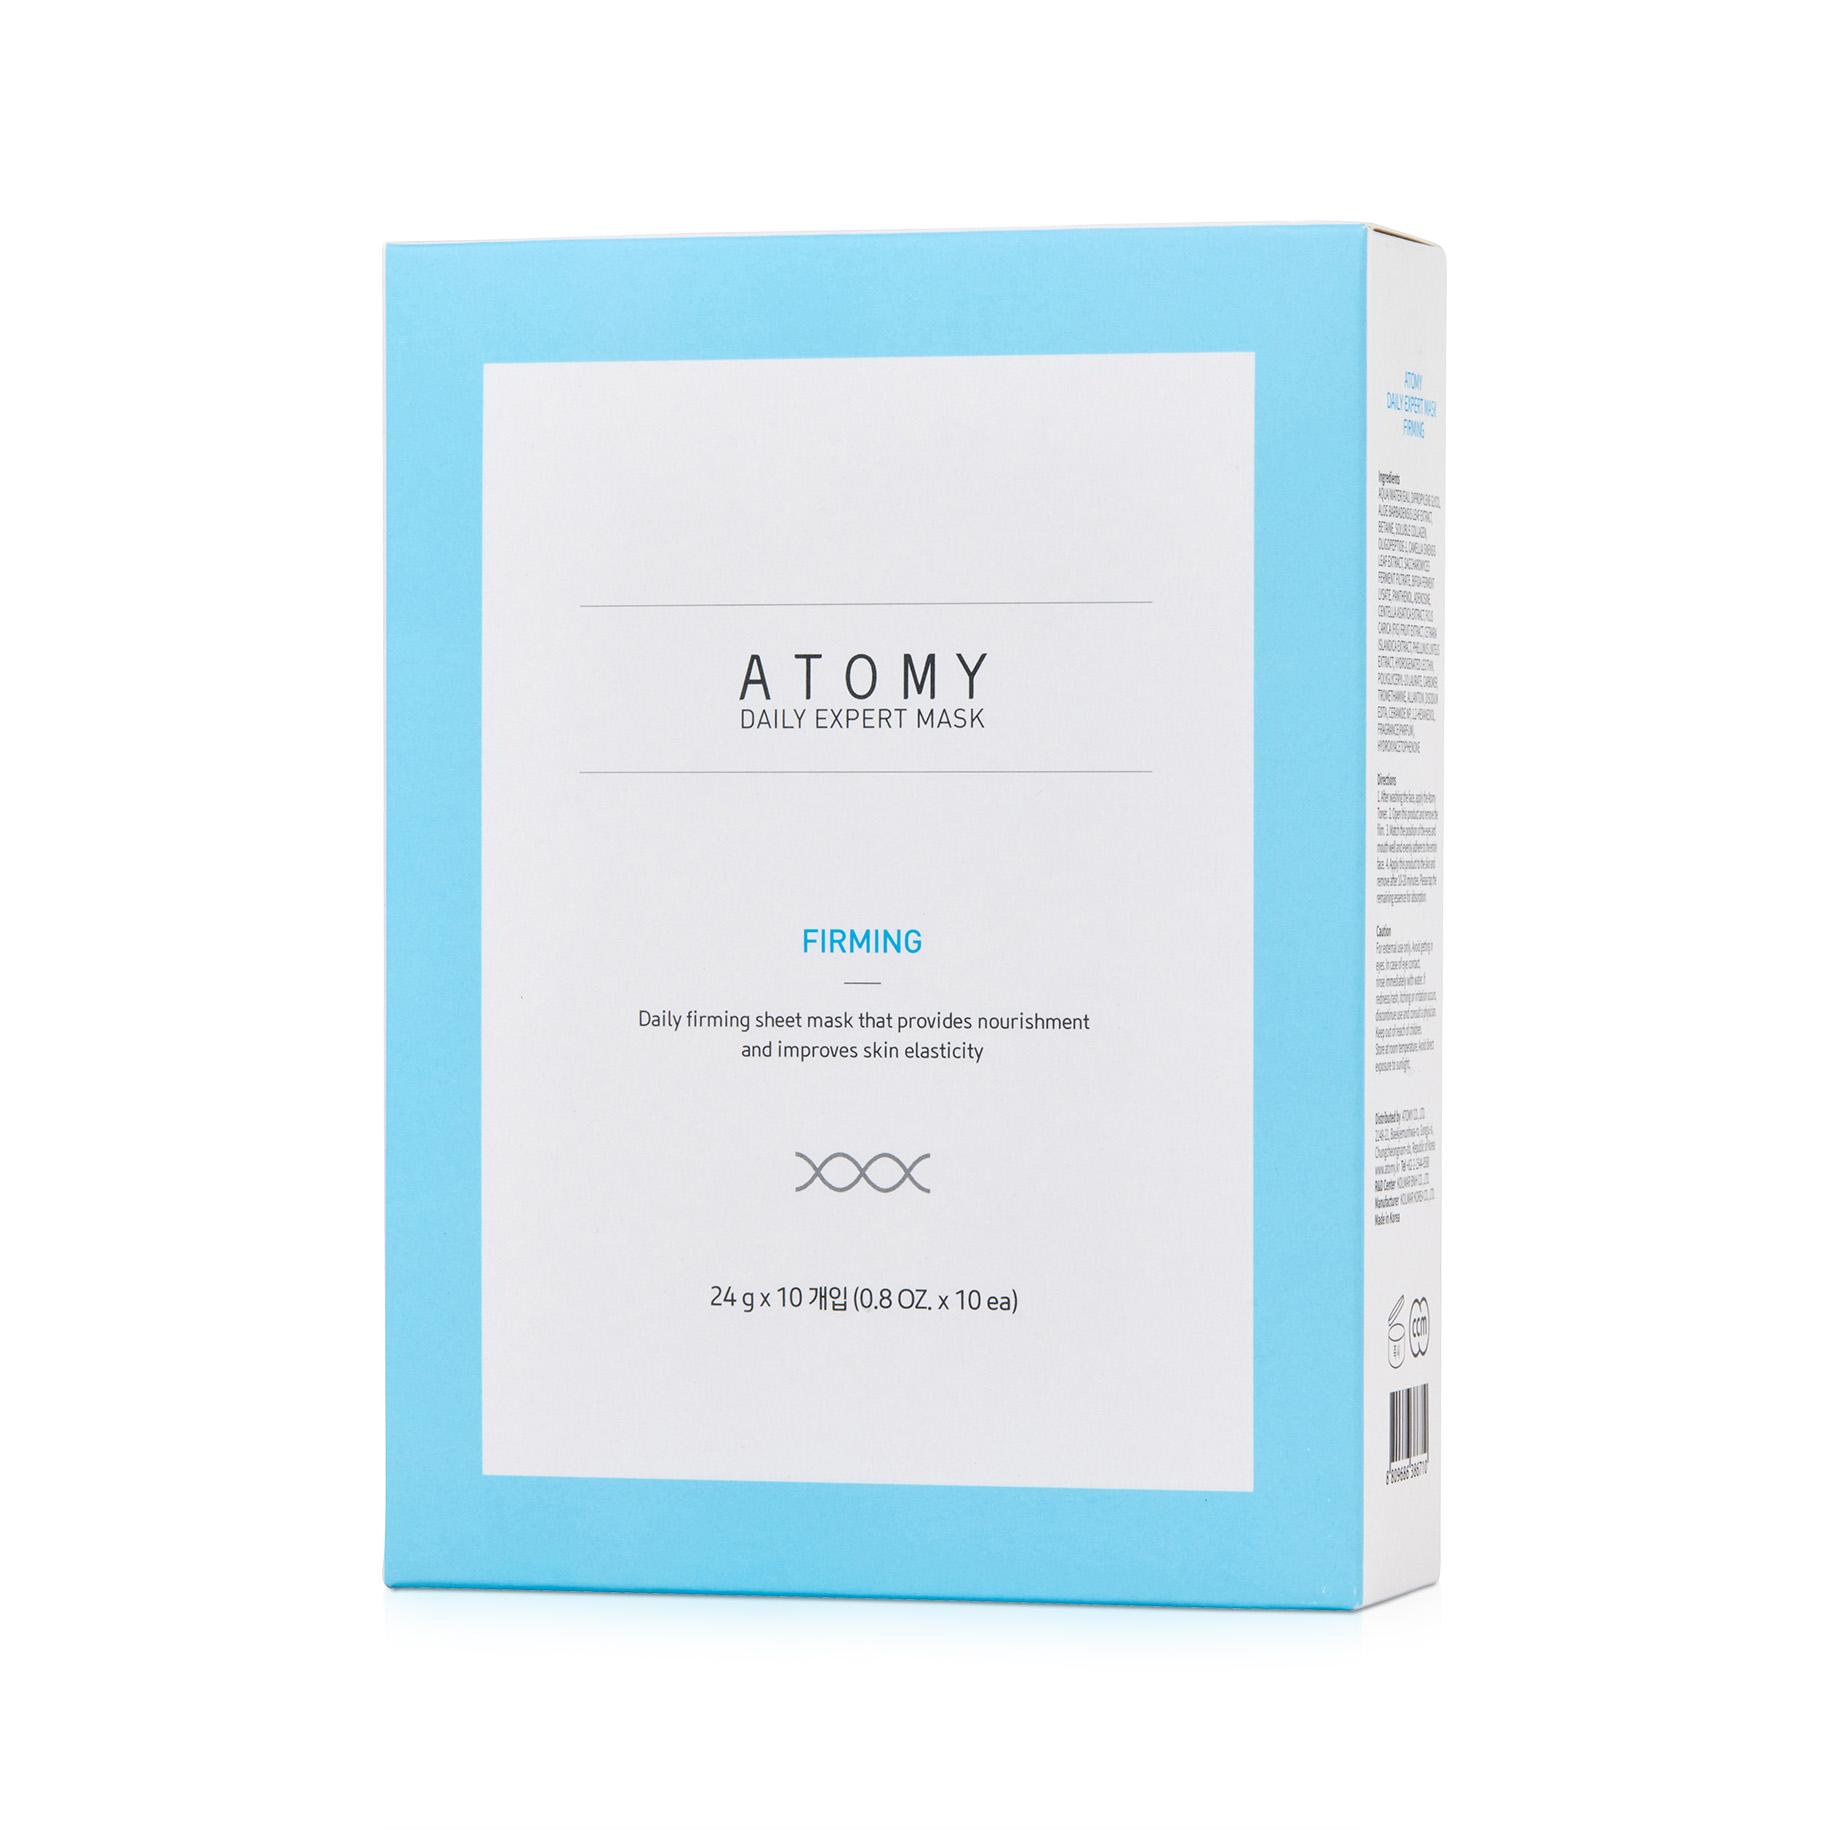 Atomy Daily Expert Mask Firming